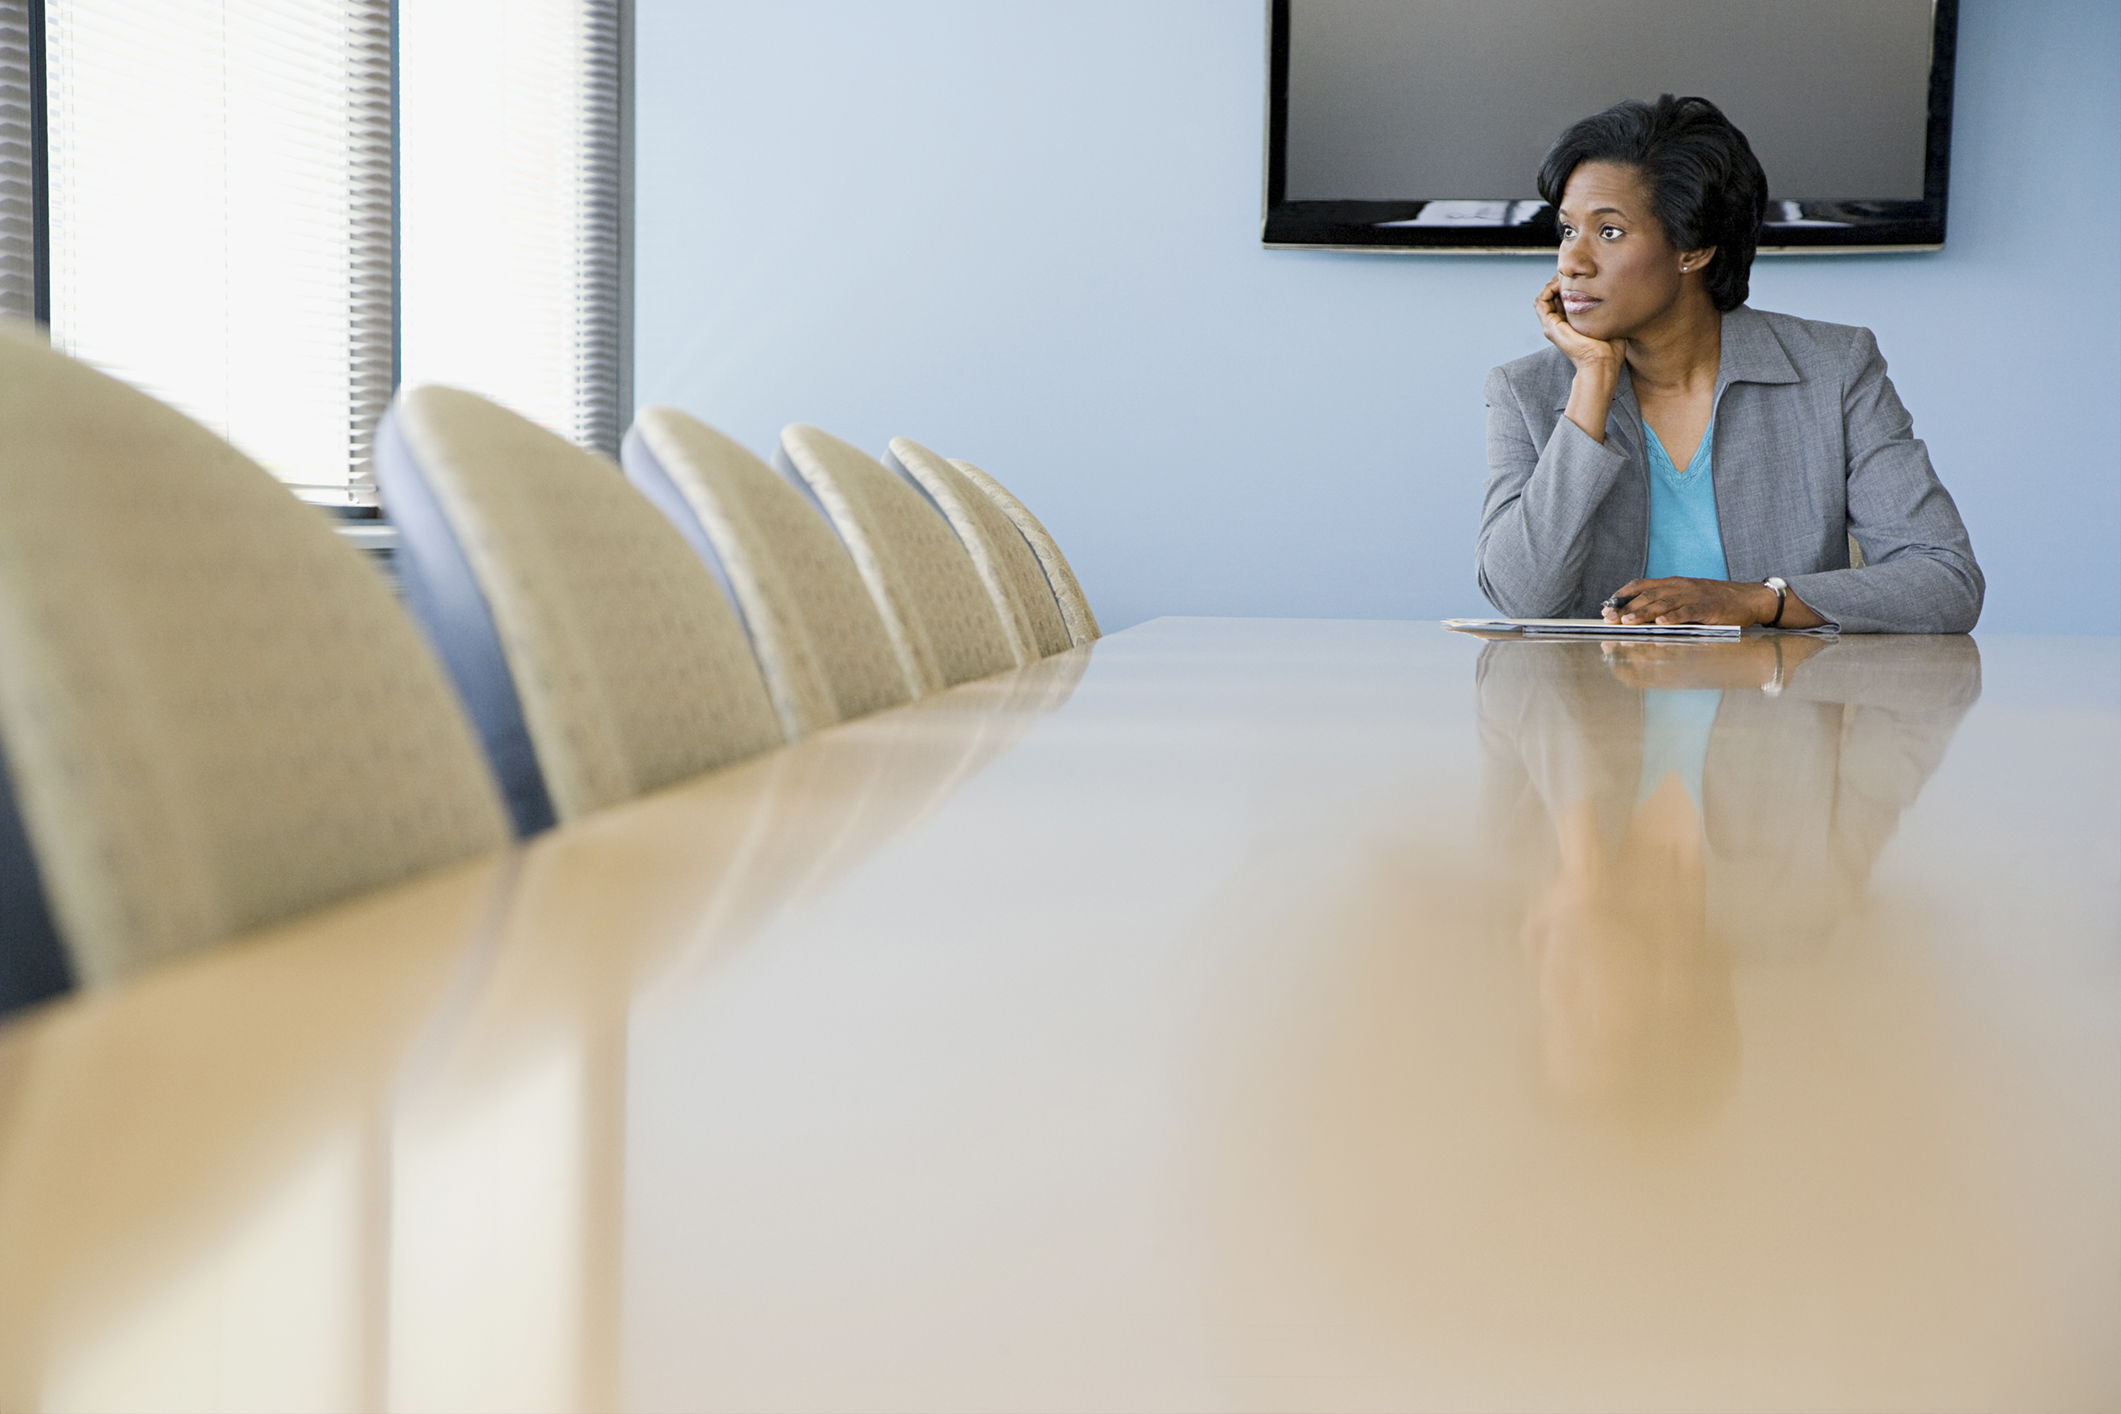 Business executive sits alone in boardroom